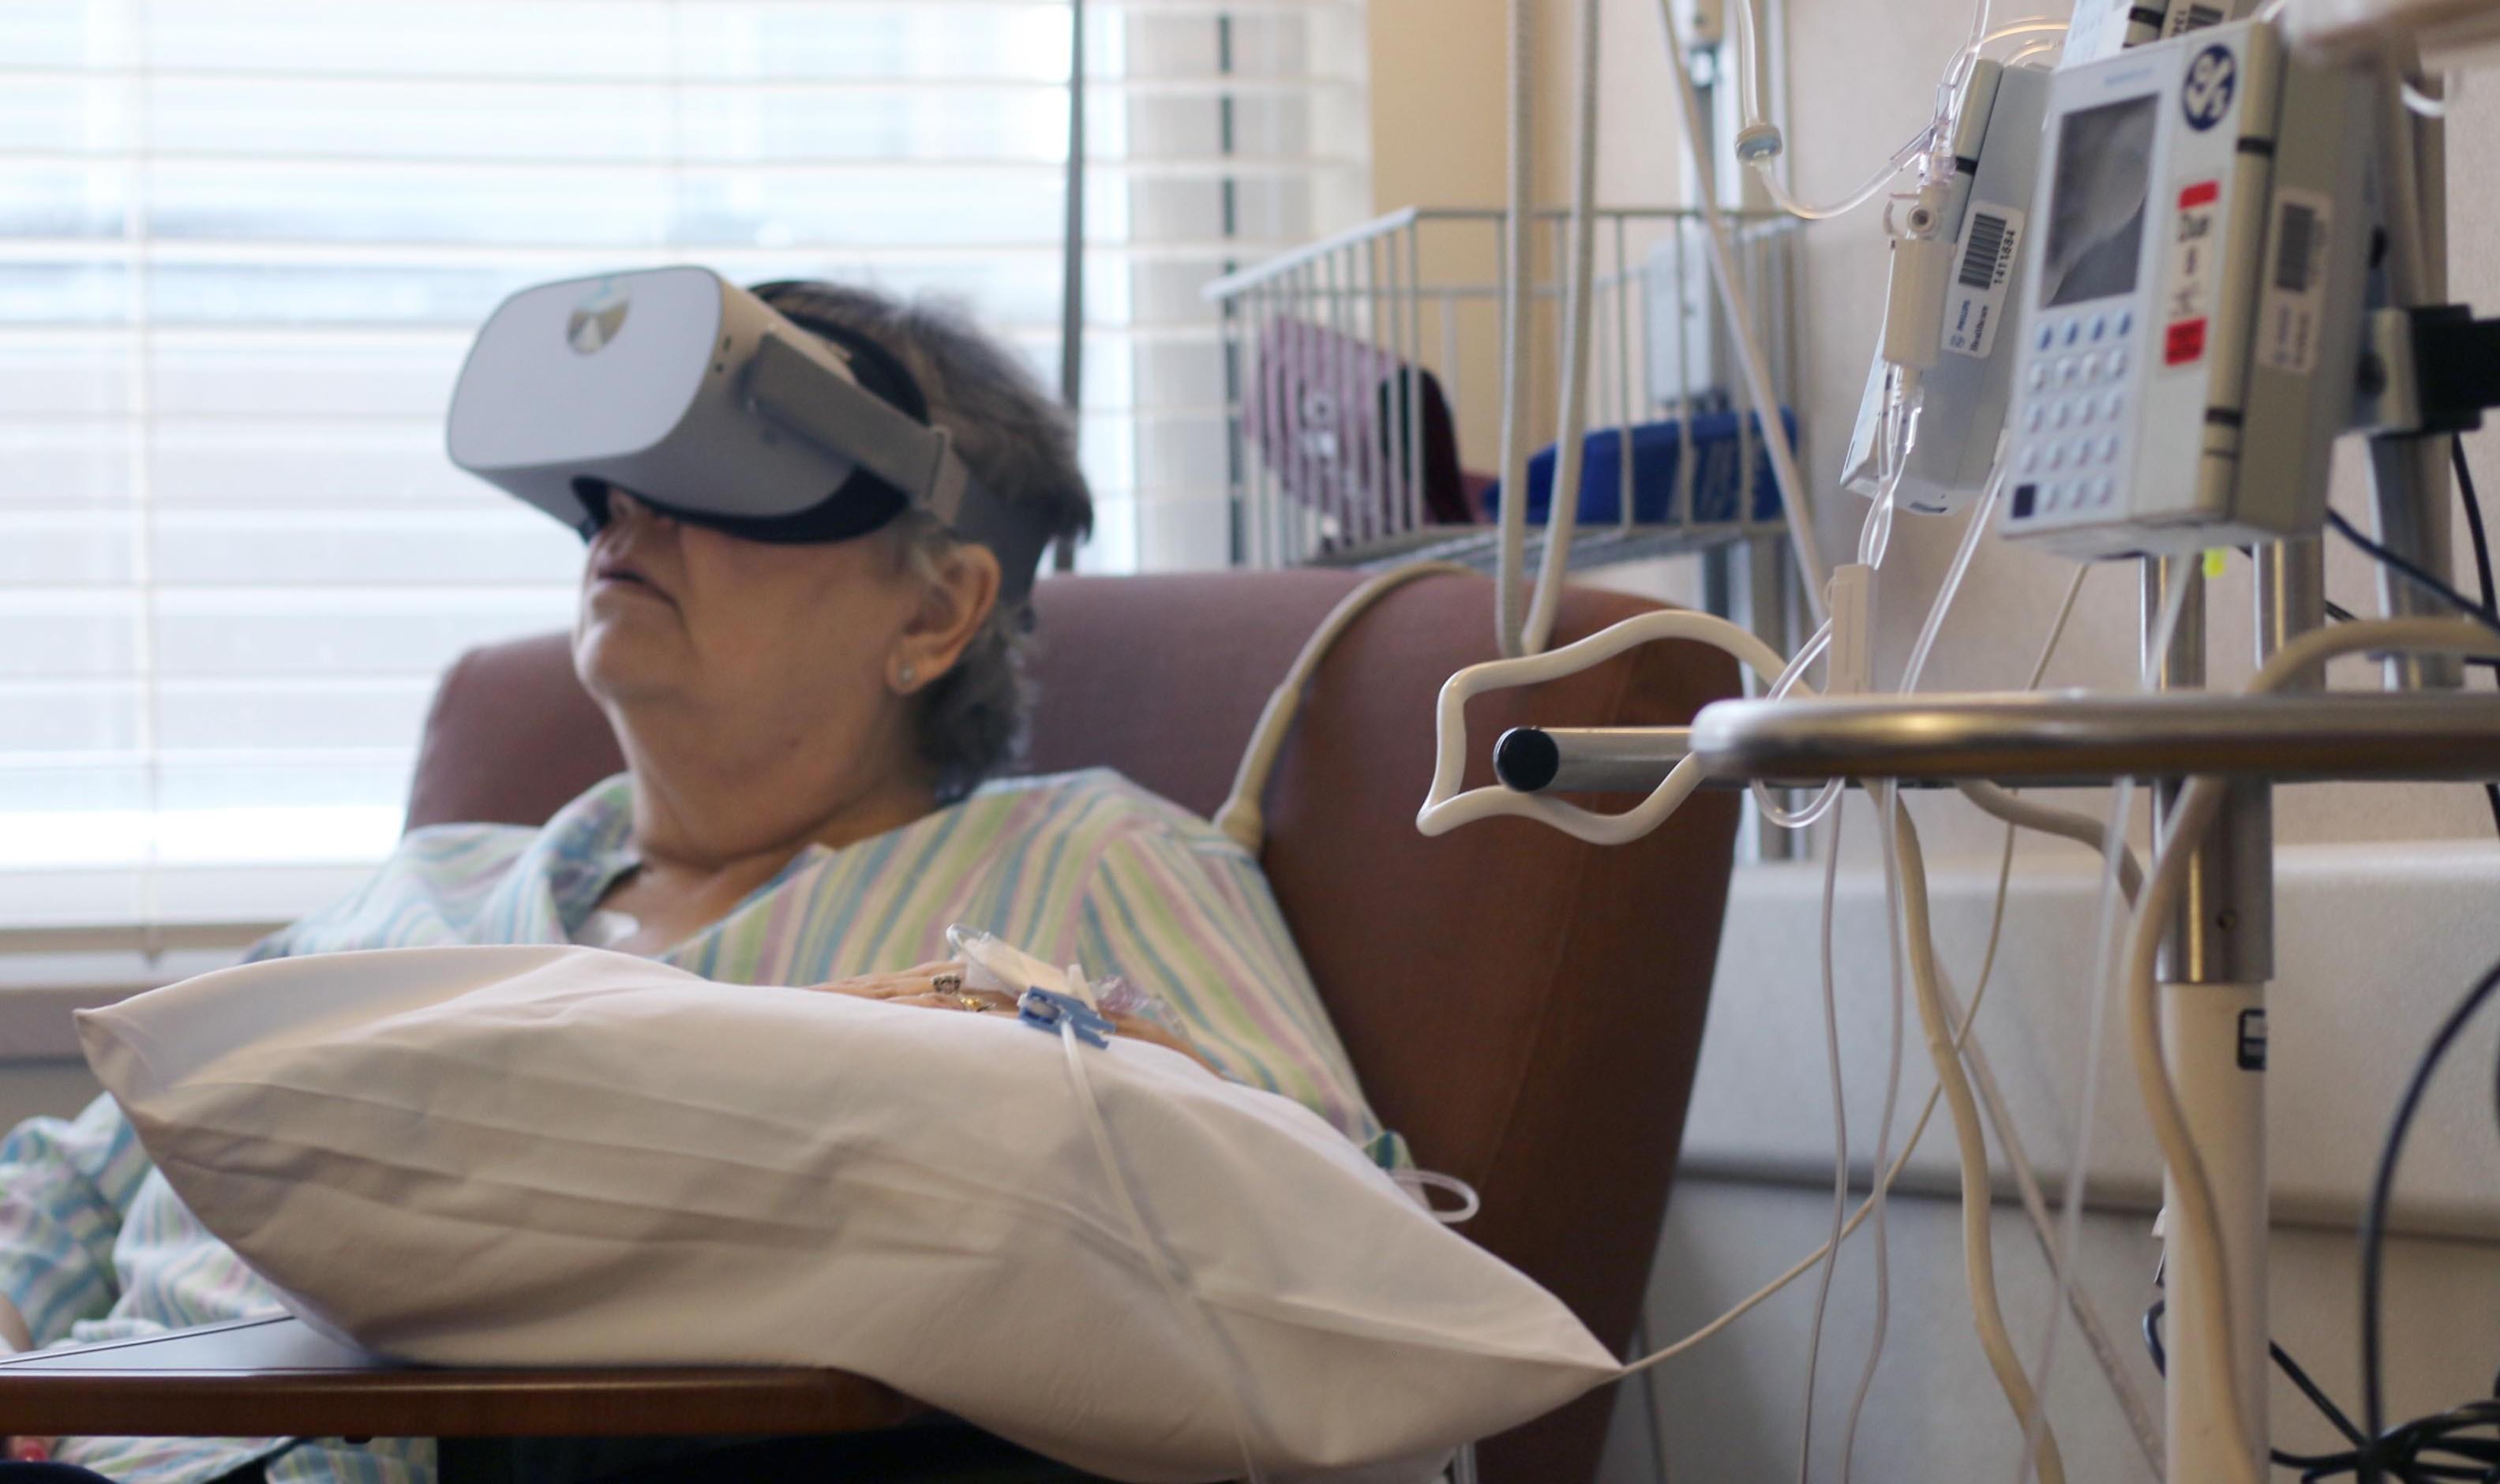 A patient receiving chemo treatments uses VR.